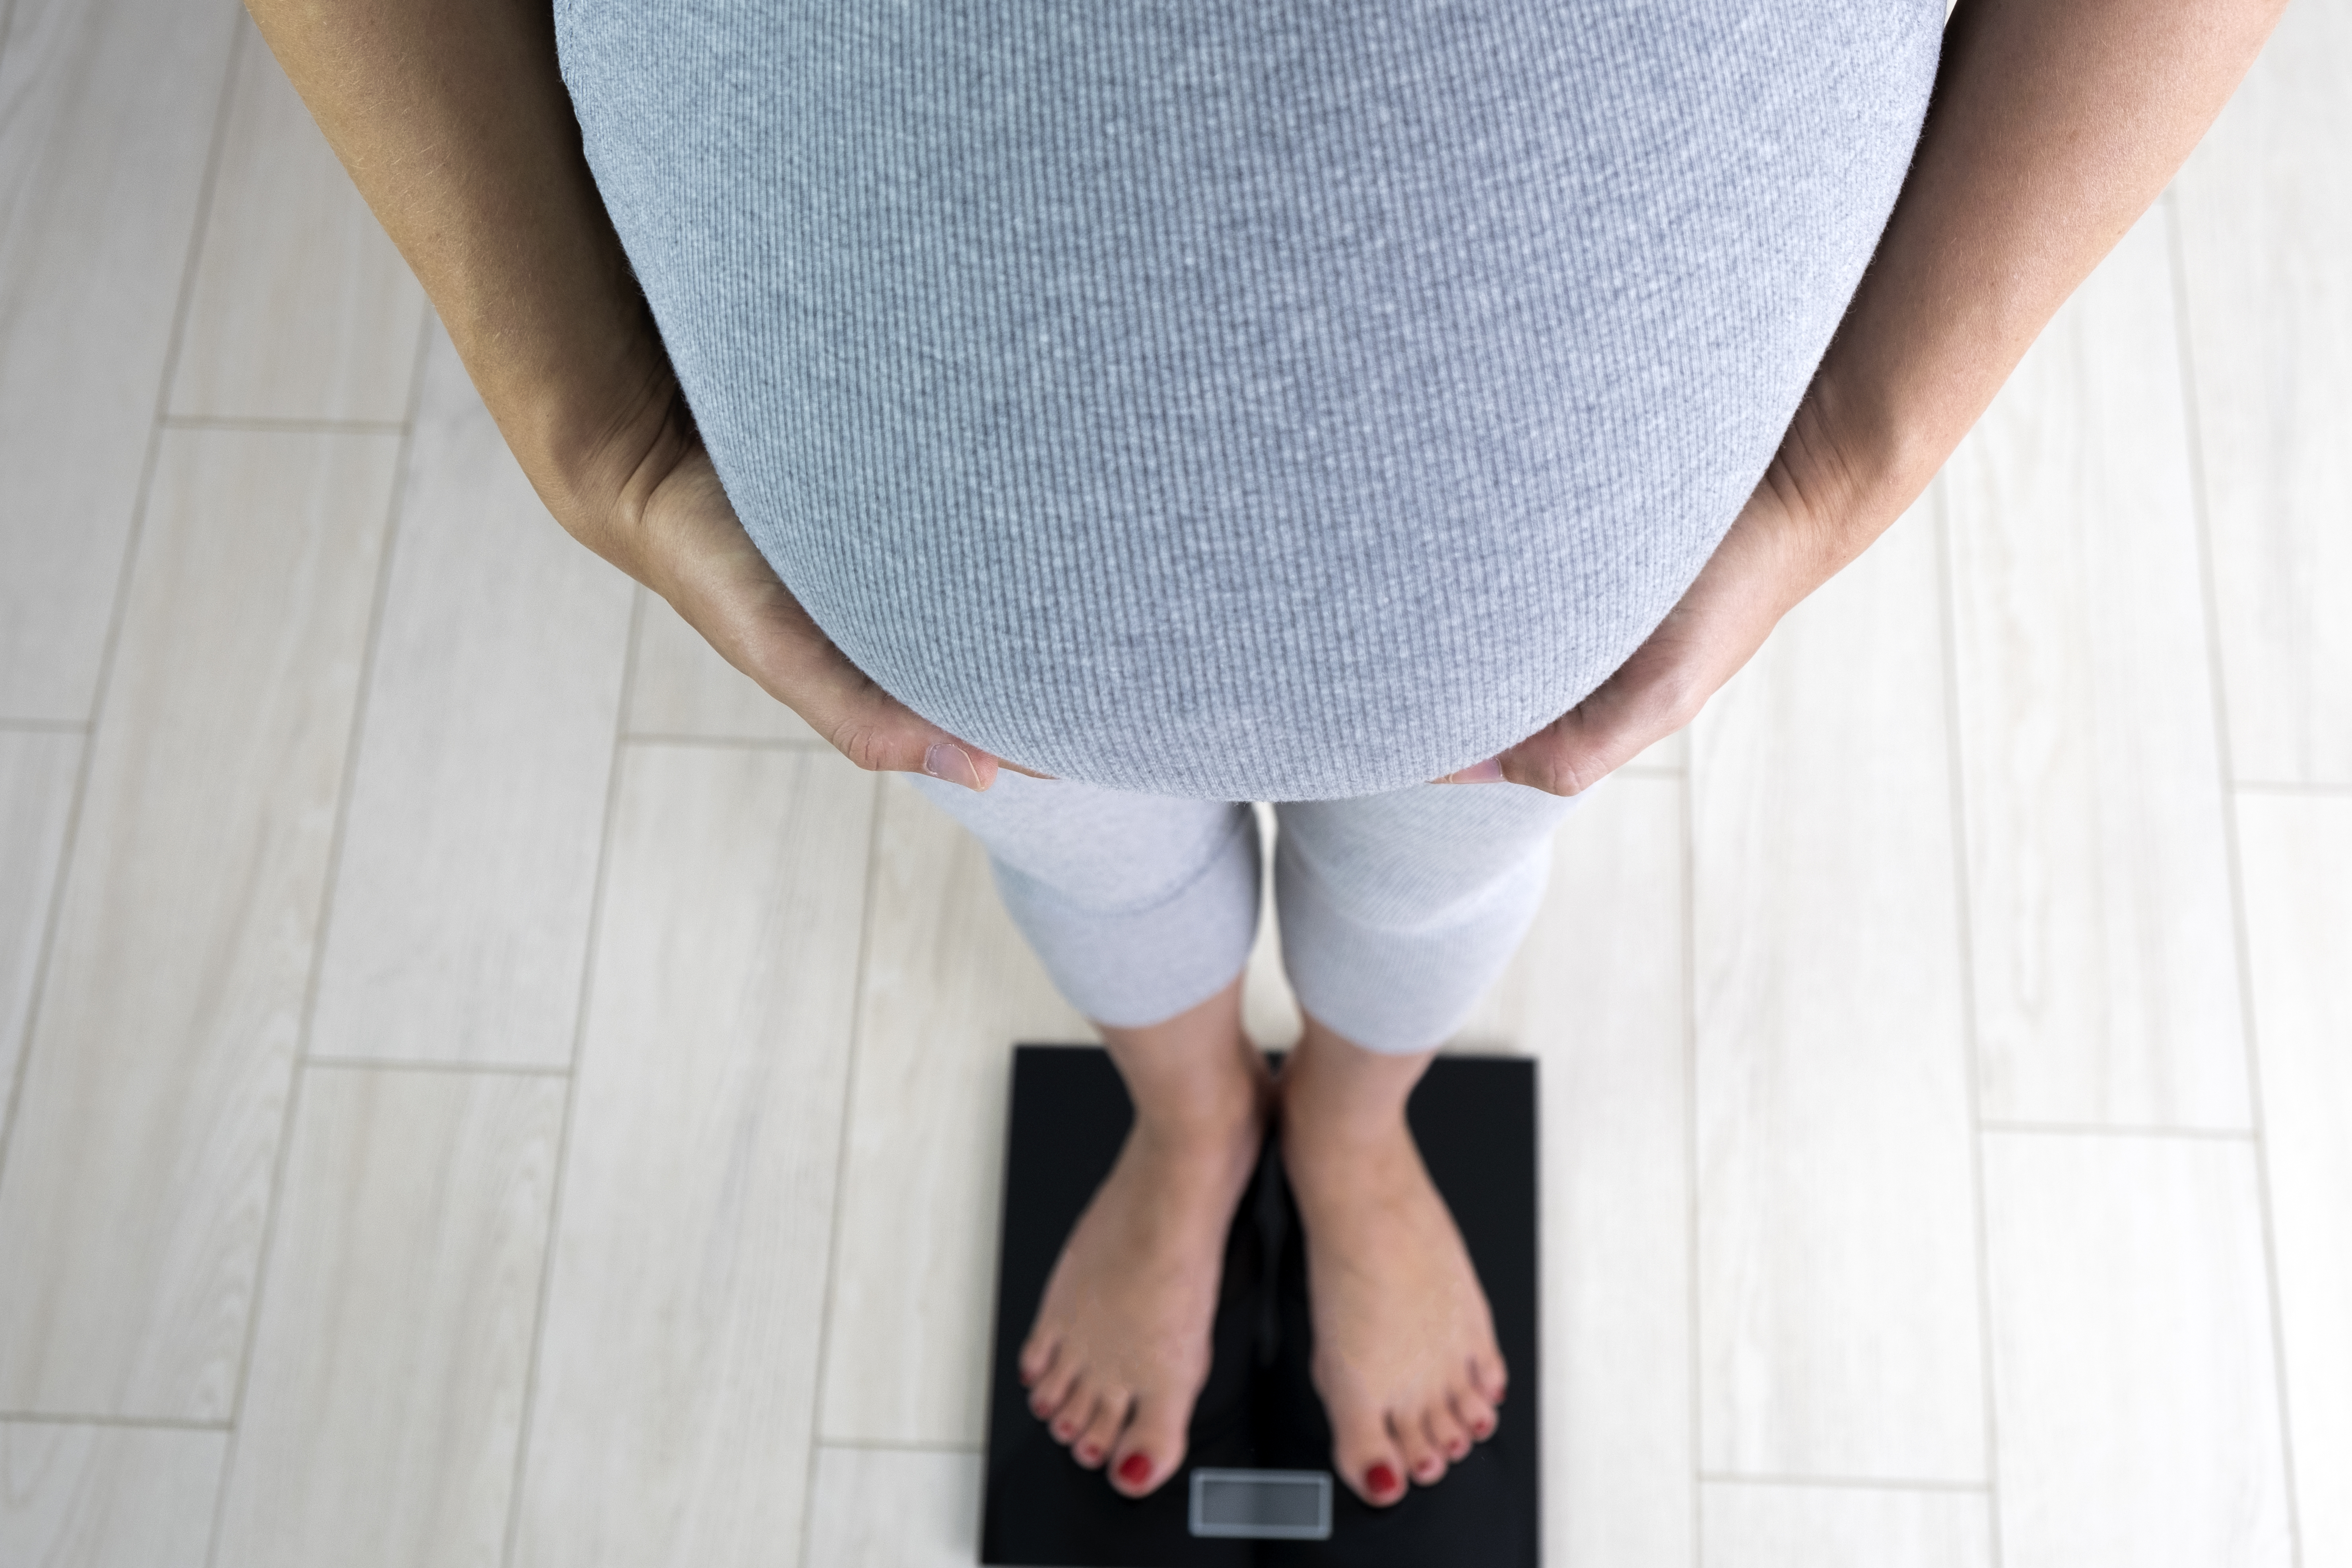 Mothers with obesity at greater risk of stillbirth: Canadian study - National - Verve times